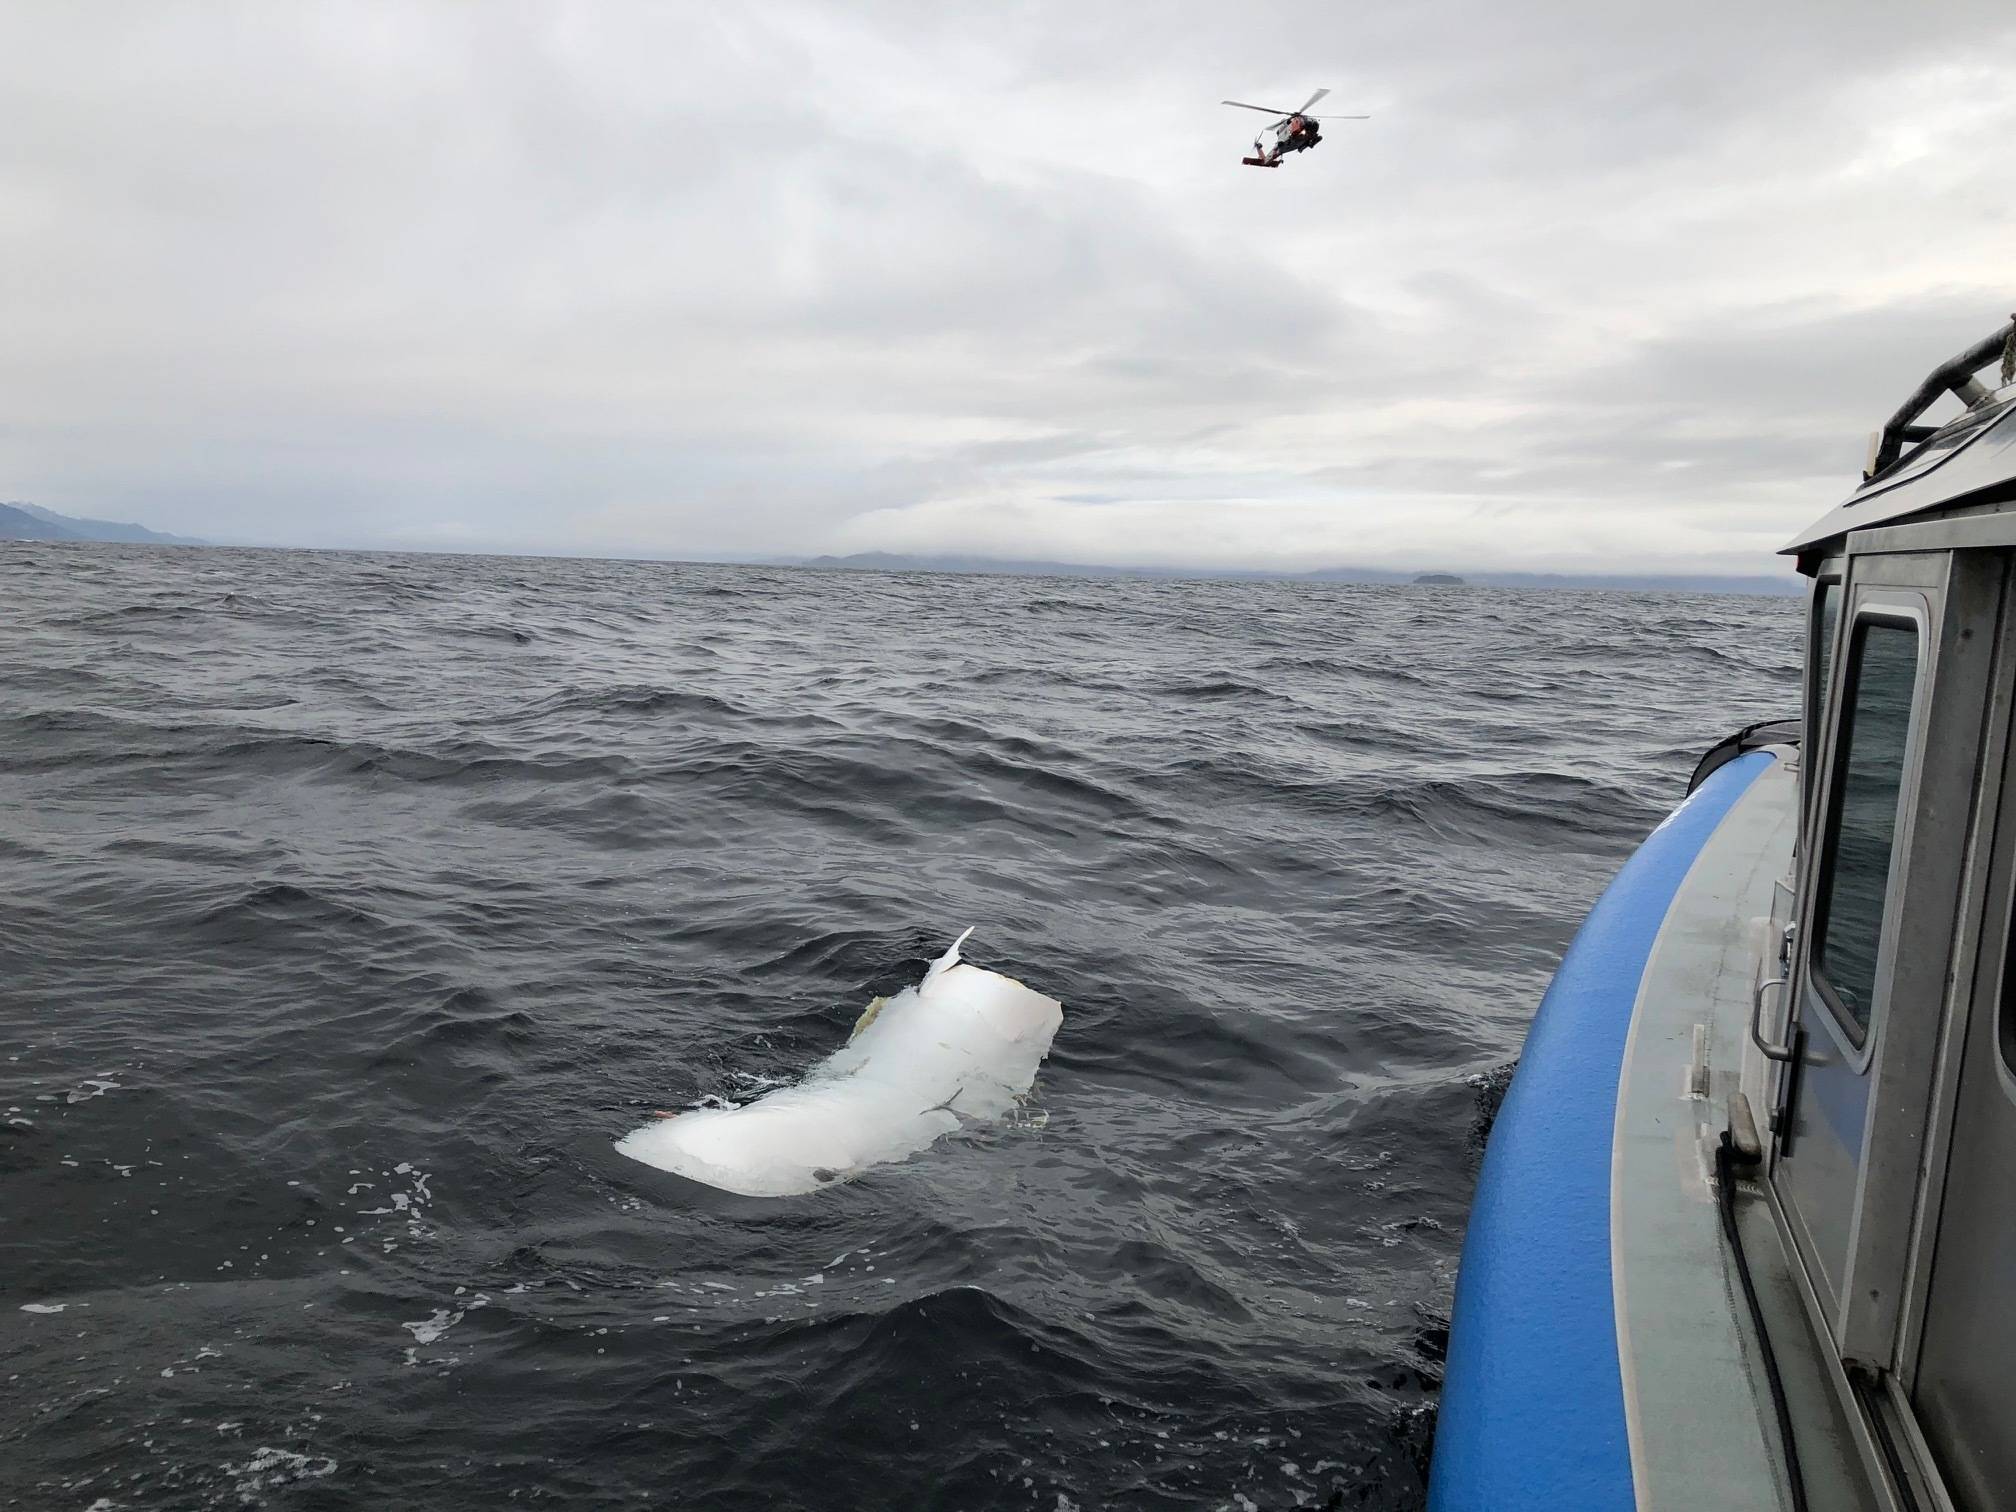 A Coast Guard Air Station Sitka MH-60 Jayhawk helicopter crew flies over a piece of debris spotted by Alaska Wildlife Troopers while searching for three people aboard an overdue Guardian Life Flight aircraft 20-miles west of Kake, Alaska, Jan. 30, 2019. Coast Guard Cutters Anacapa and Bailey Barco, along with an Alaska Army National Guard, several search and rescue teams and good Samaritans began searching for the aircraft and three people aboard after it did not arrive as scheduled to Kake Jan. 29, 2019, to retrieve a patient for transport. (Photo courtesy of Alaska Wildlife Troopers)